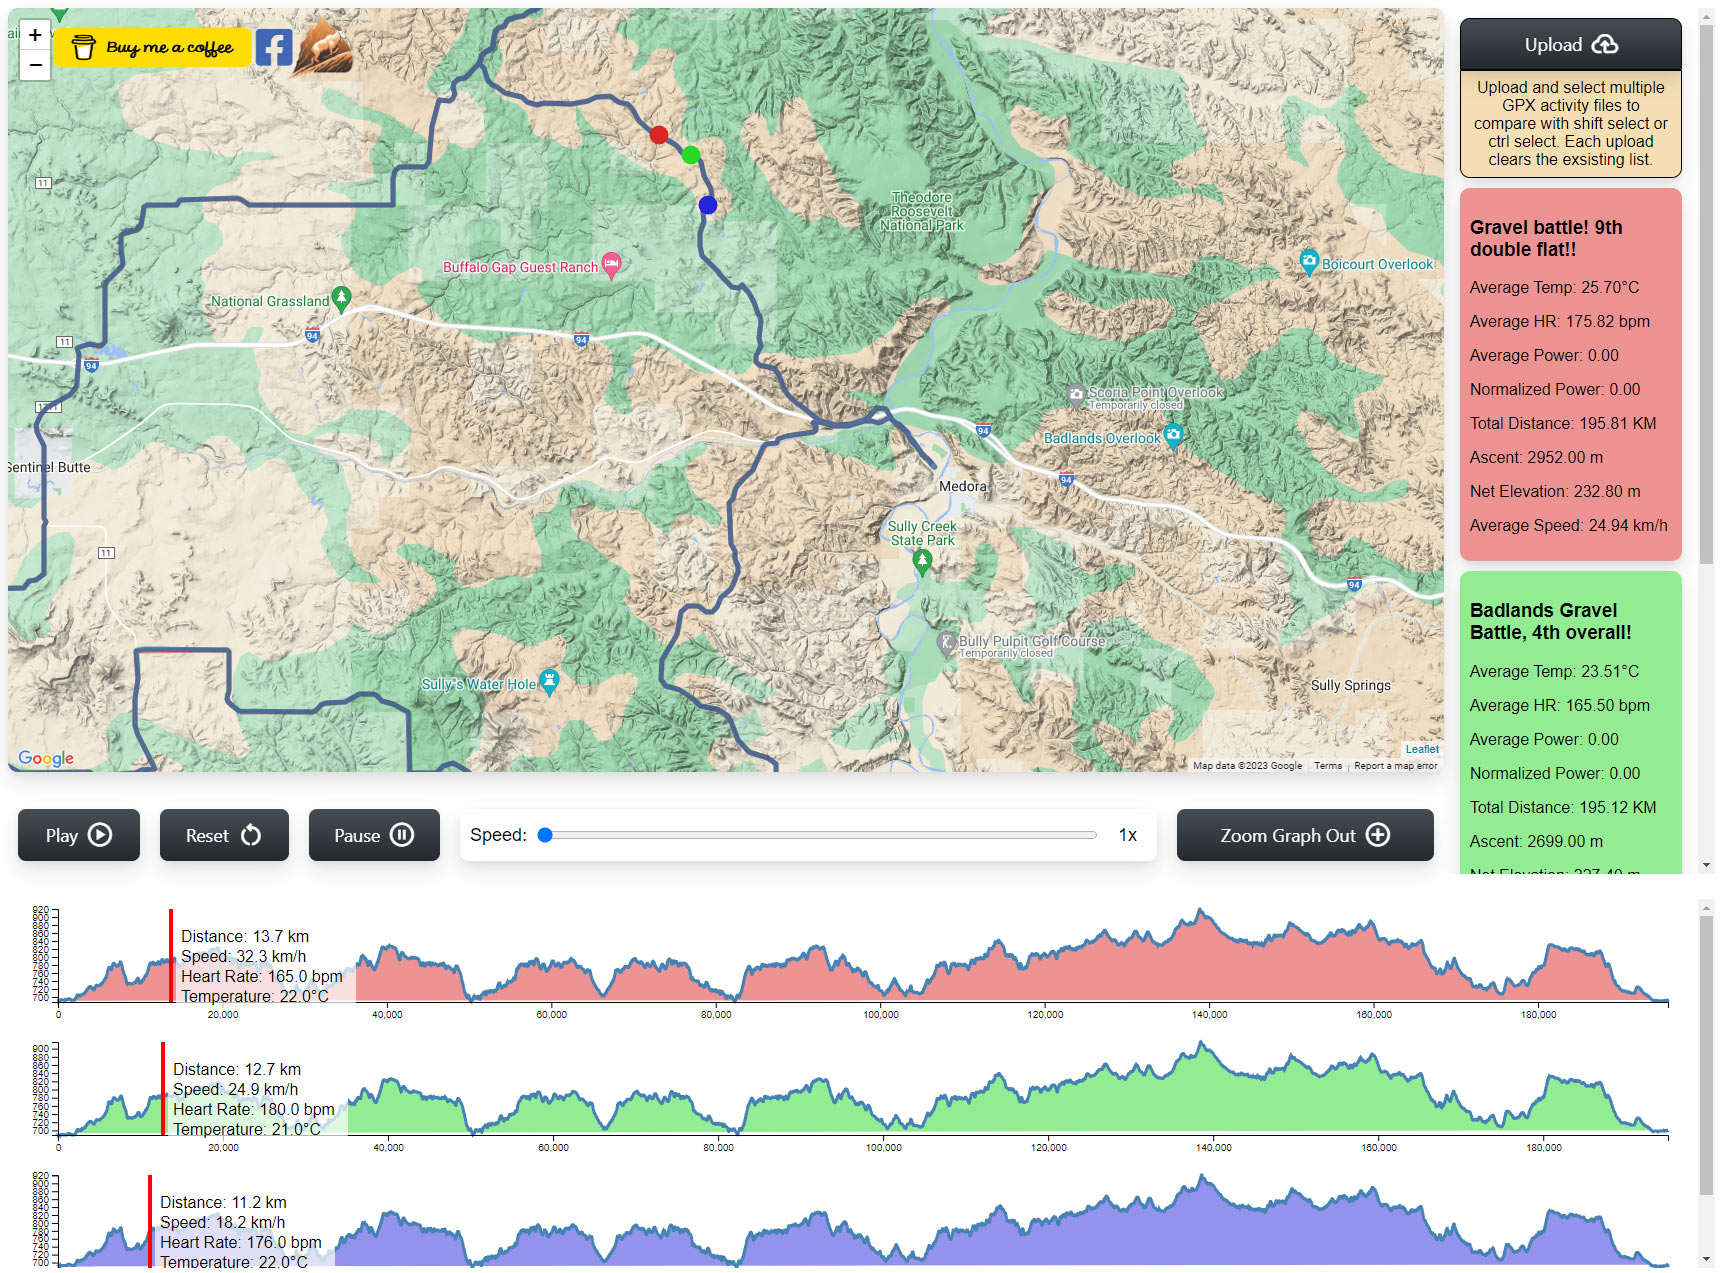 sherpa map activity racer compares multiple GPX ride files to show who is faster